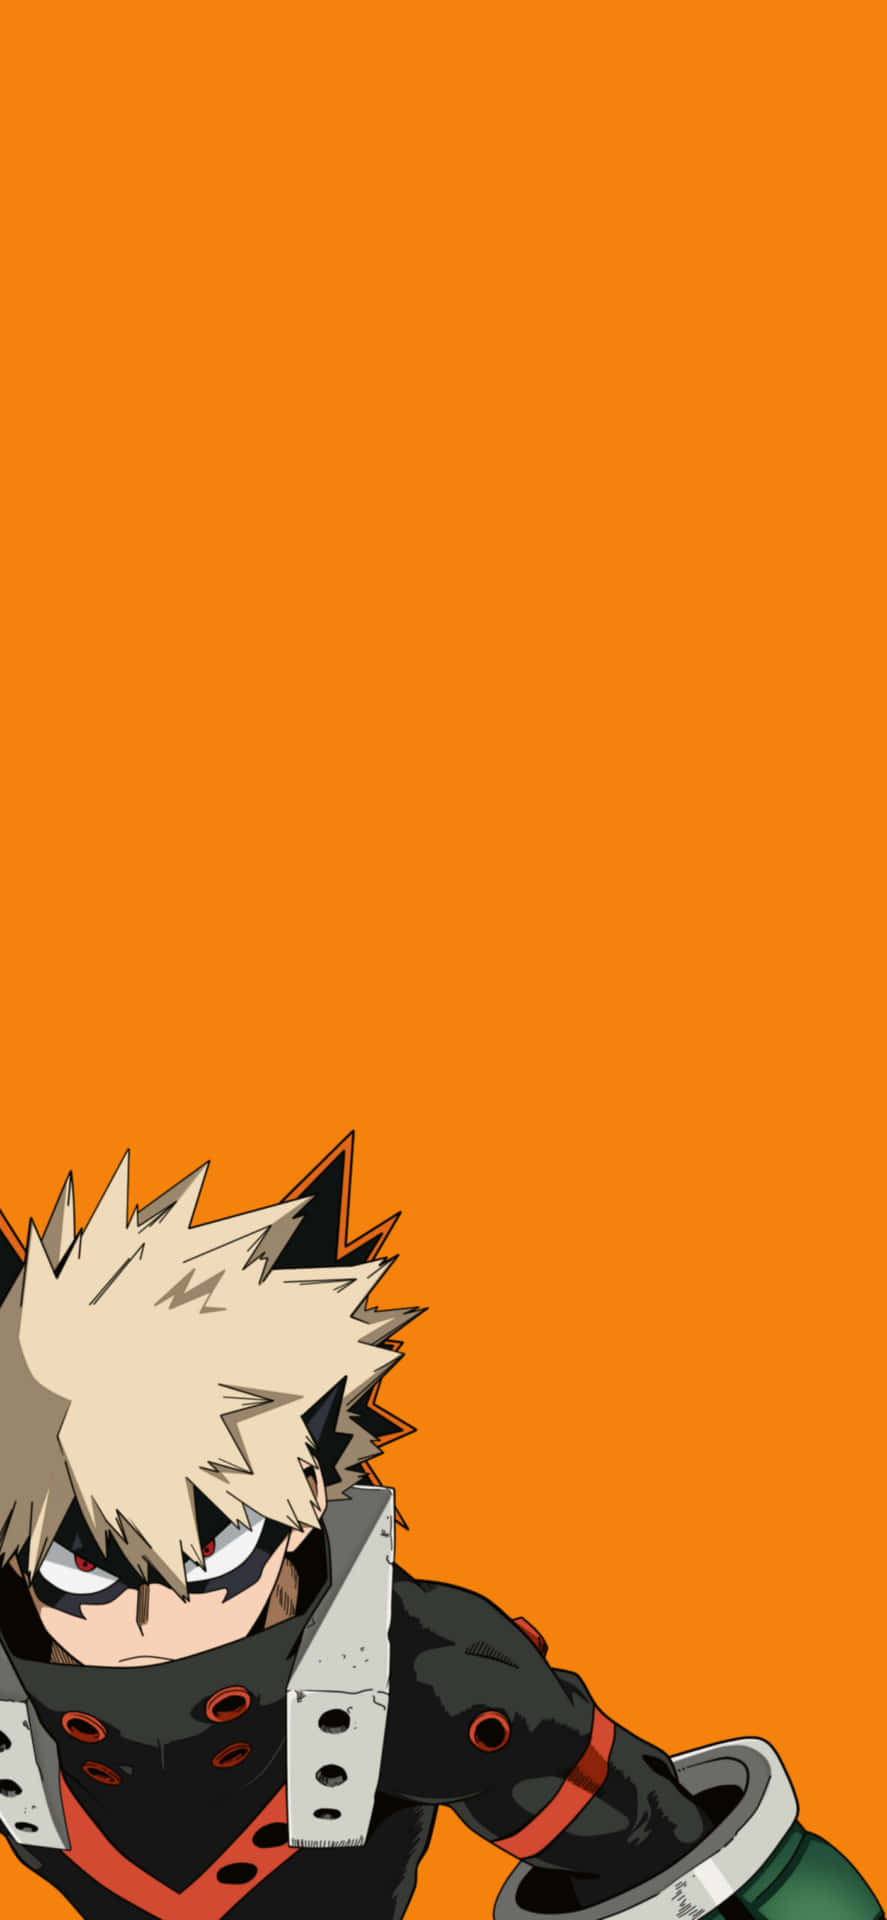 Upgrade your lifestyle with the all-new Bakugo Phone Wallpaper